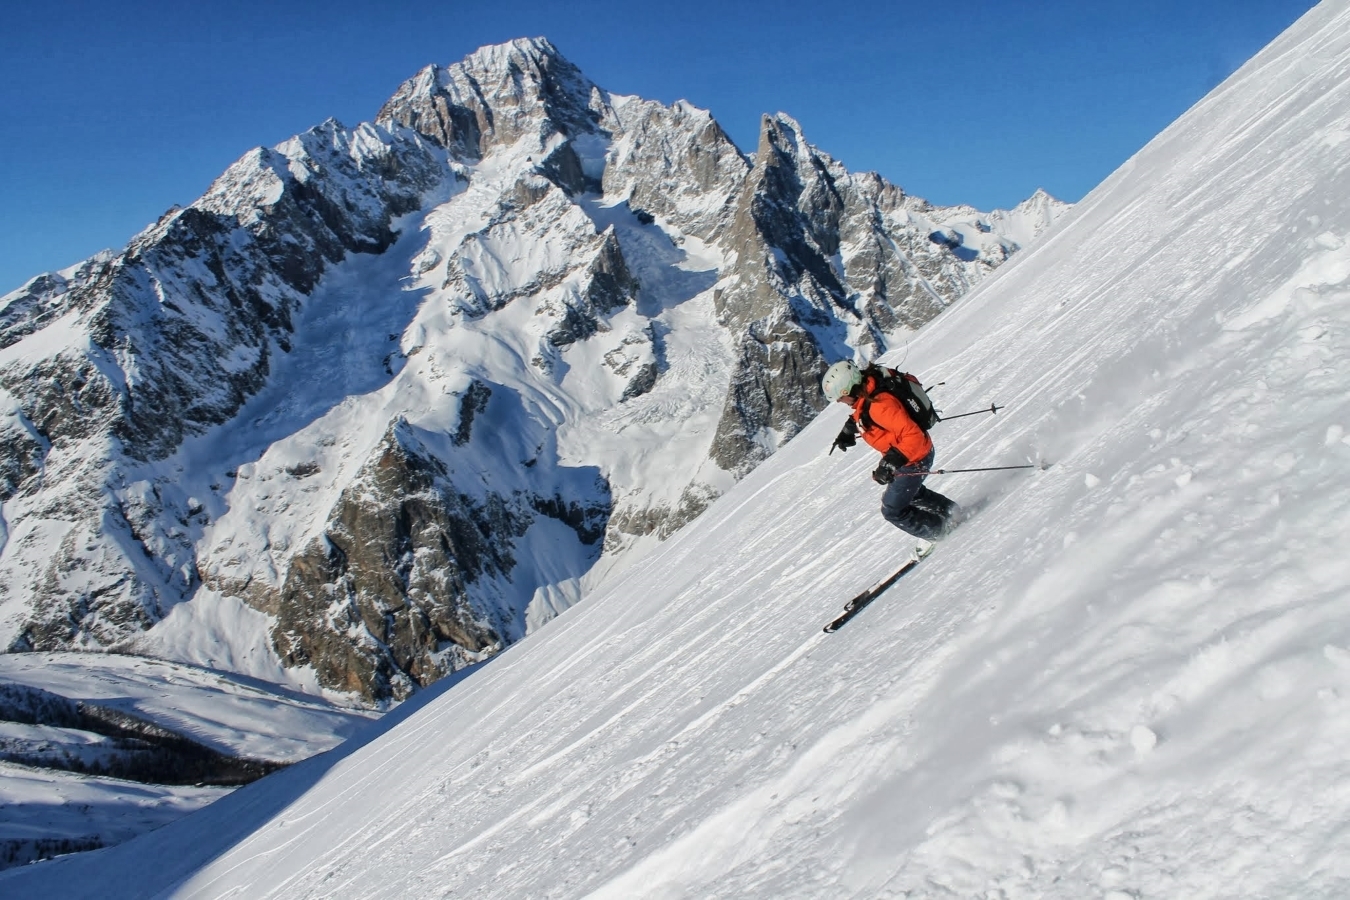 Skier rips down a slope on the Chamonix Ski Touring Weekend